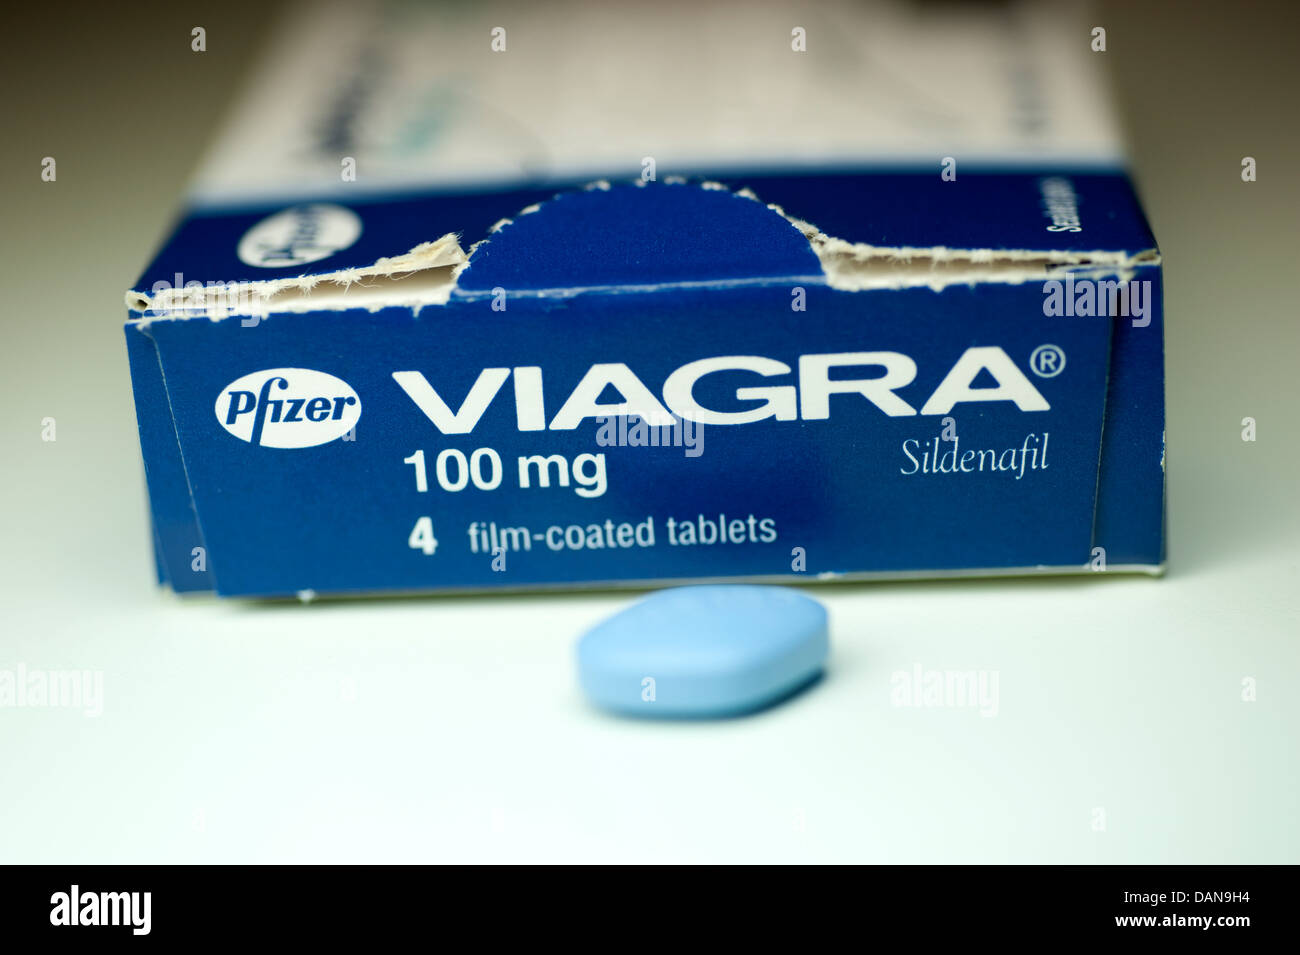 The Stuff About viagra You Probably Hadn't Considered. And Really Should